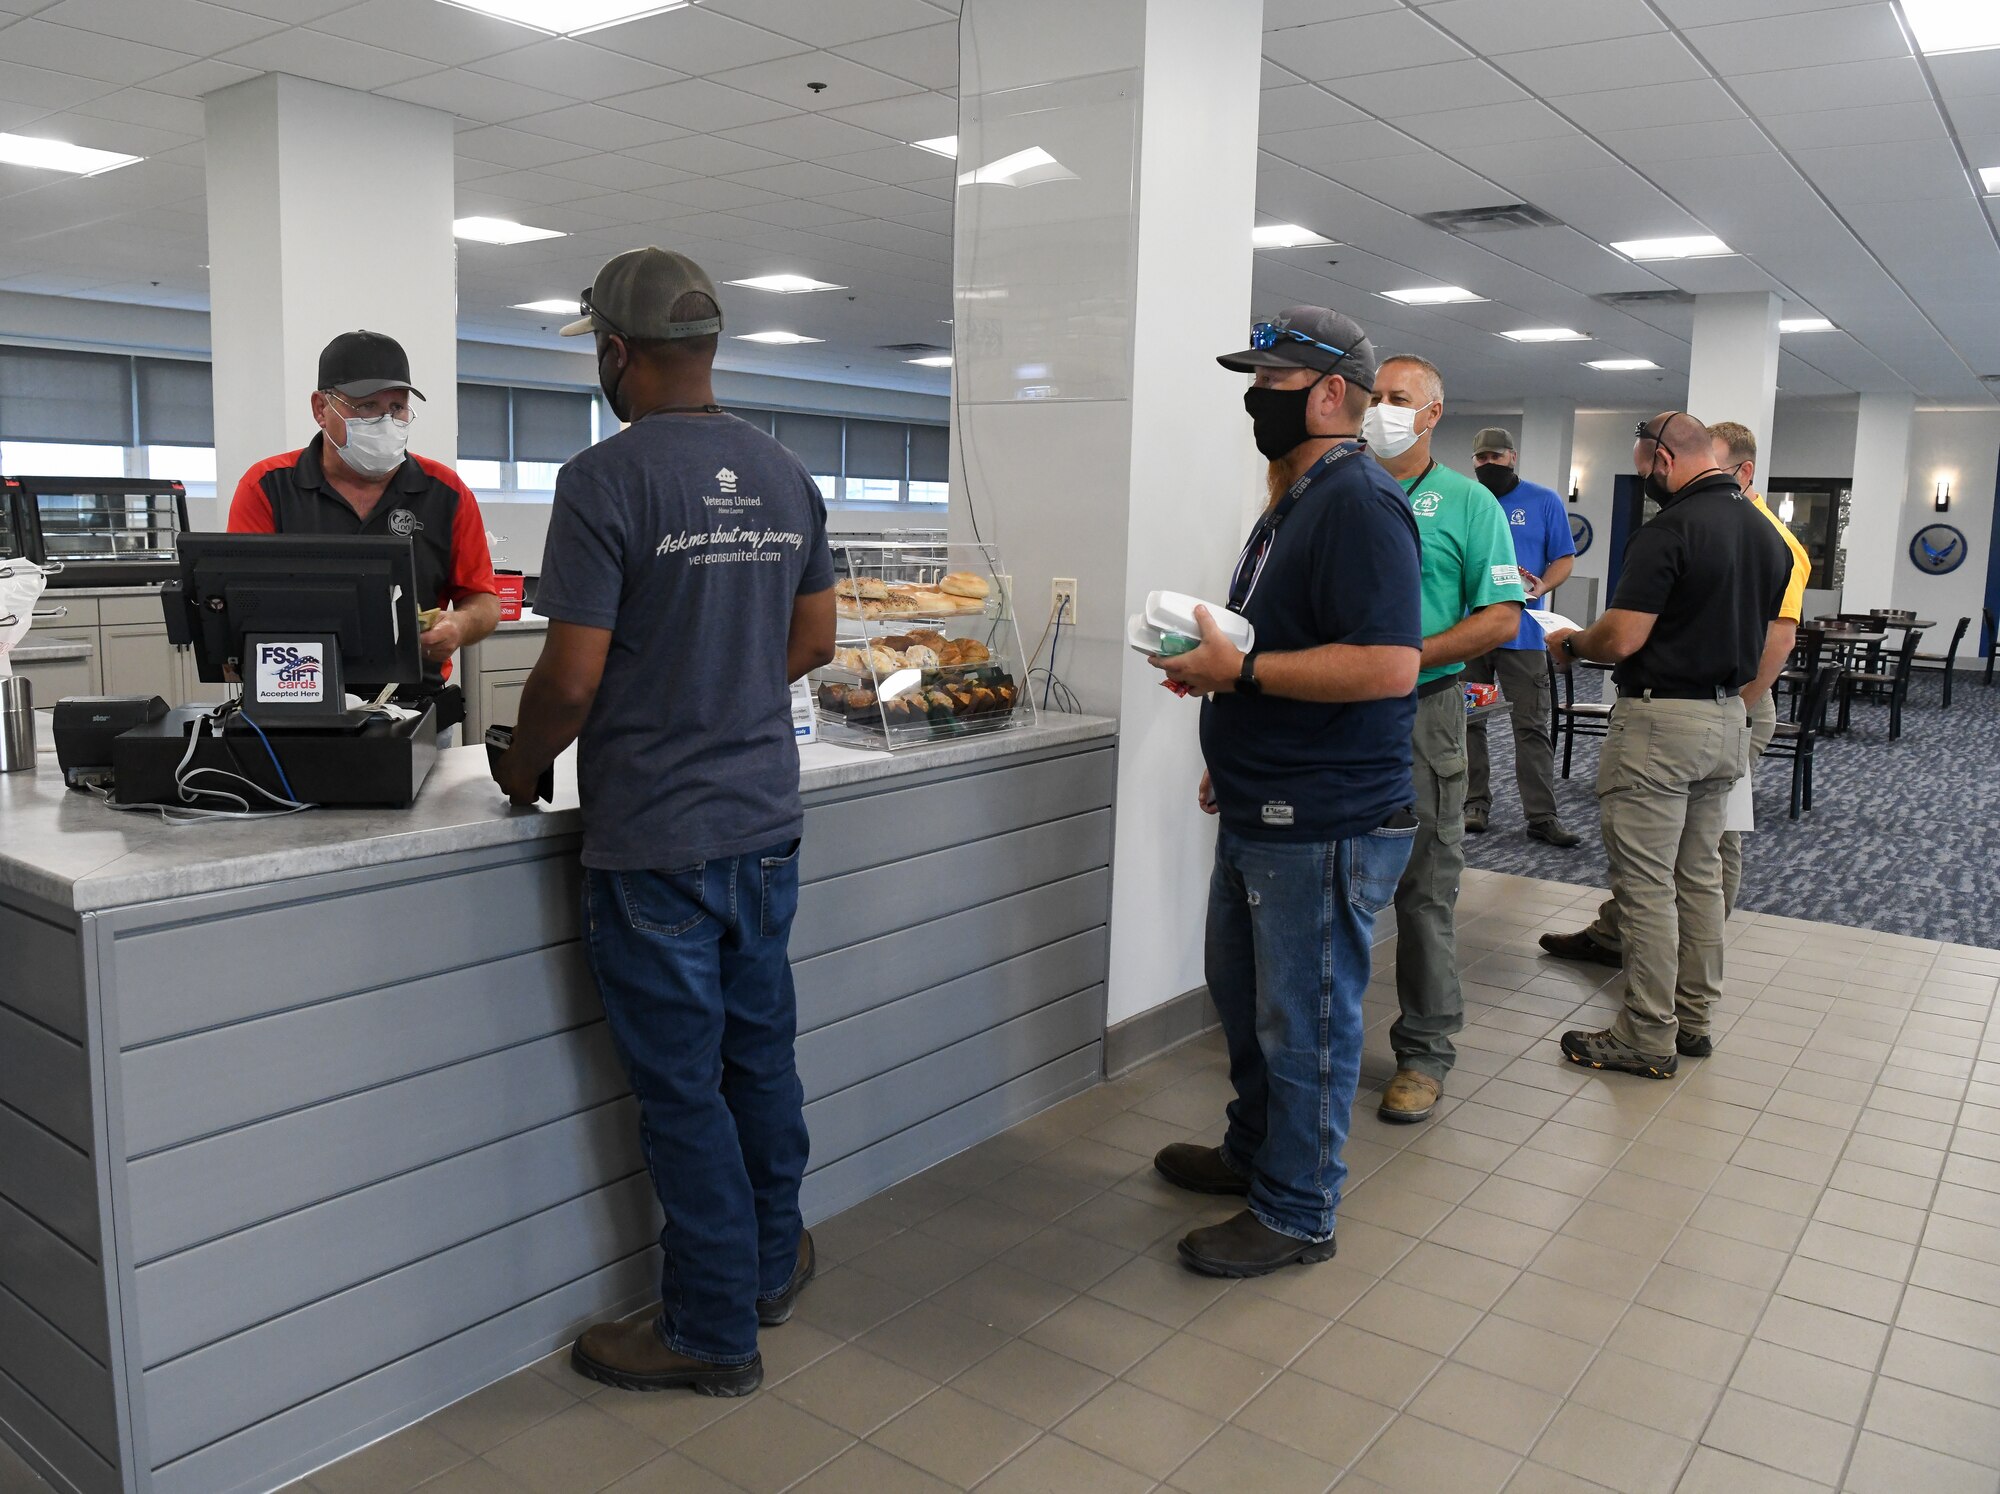 Steve Barnes, a Café 100 employee, serves customers, Sept. 9, 2021, at Arnold Air Force Base, Tenn. The dining facility reopened after a months-long renovation. (U.S. Air Force photo by Jill Pickett)